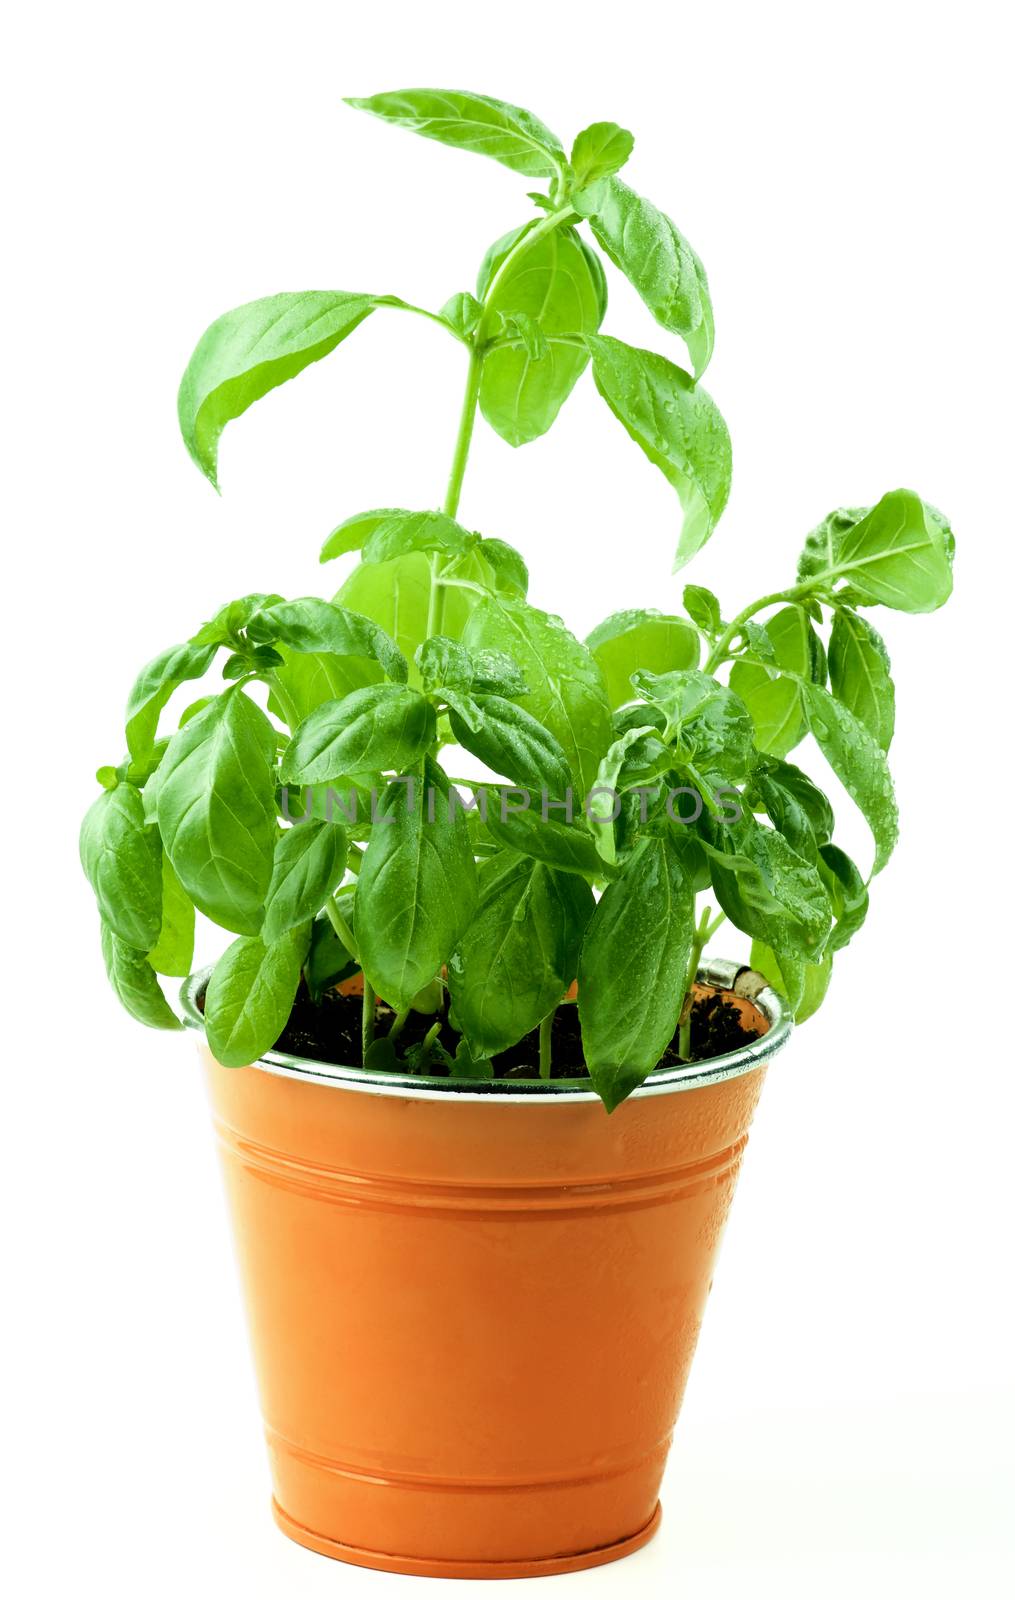 Fresh Green Lush Foliage Basil with Water Drops in Orange Flower Pot isolated on White background